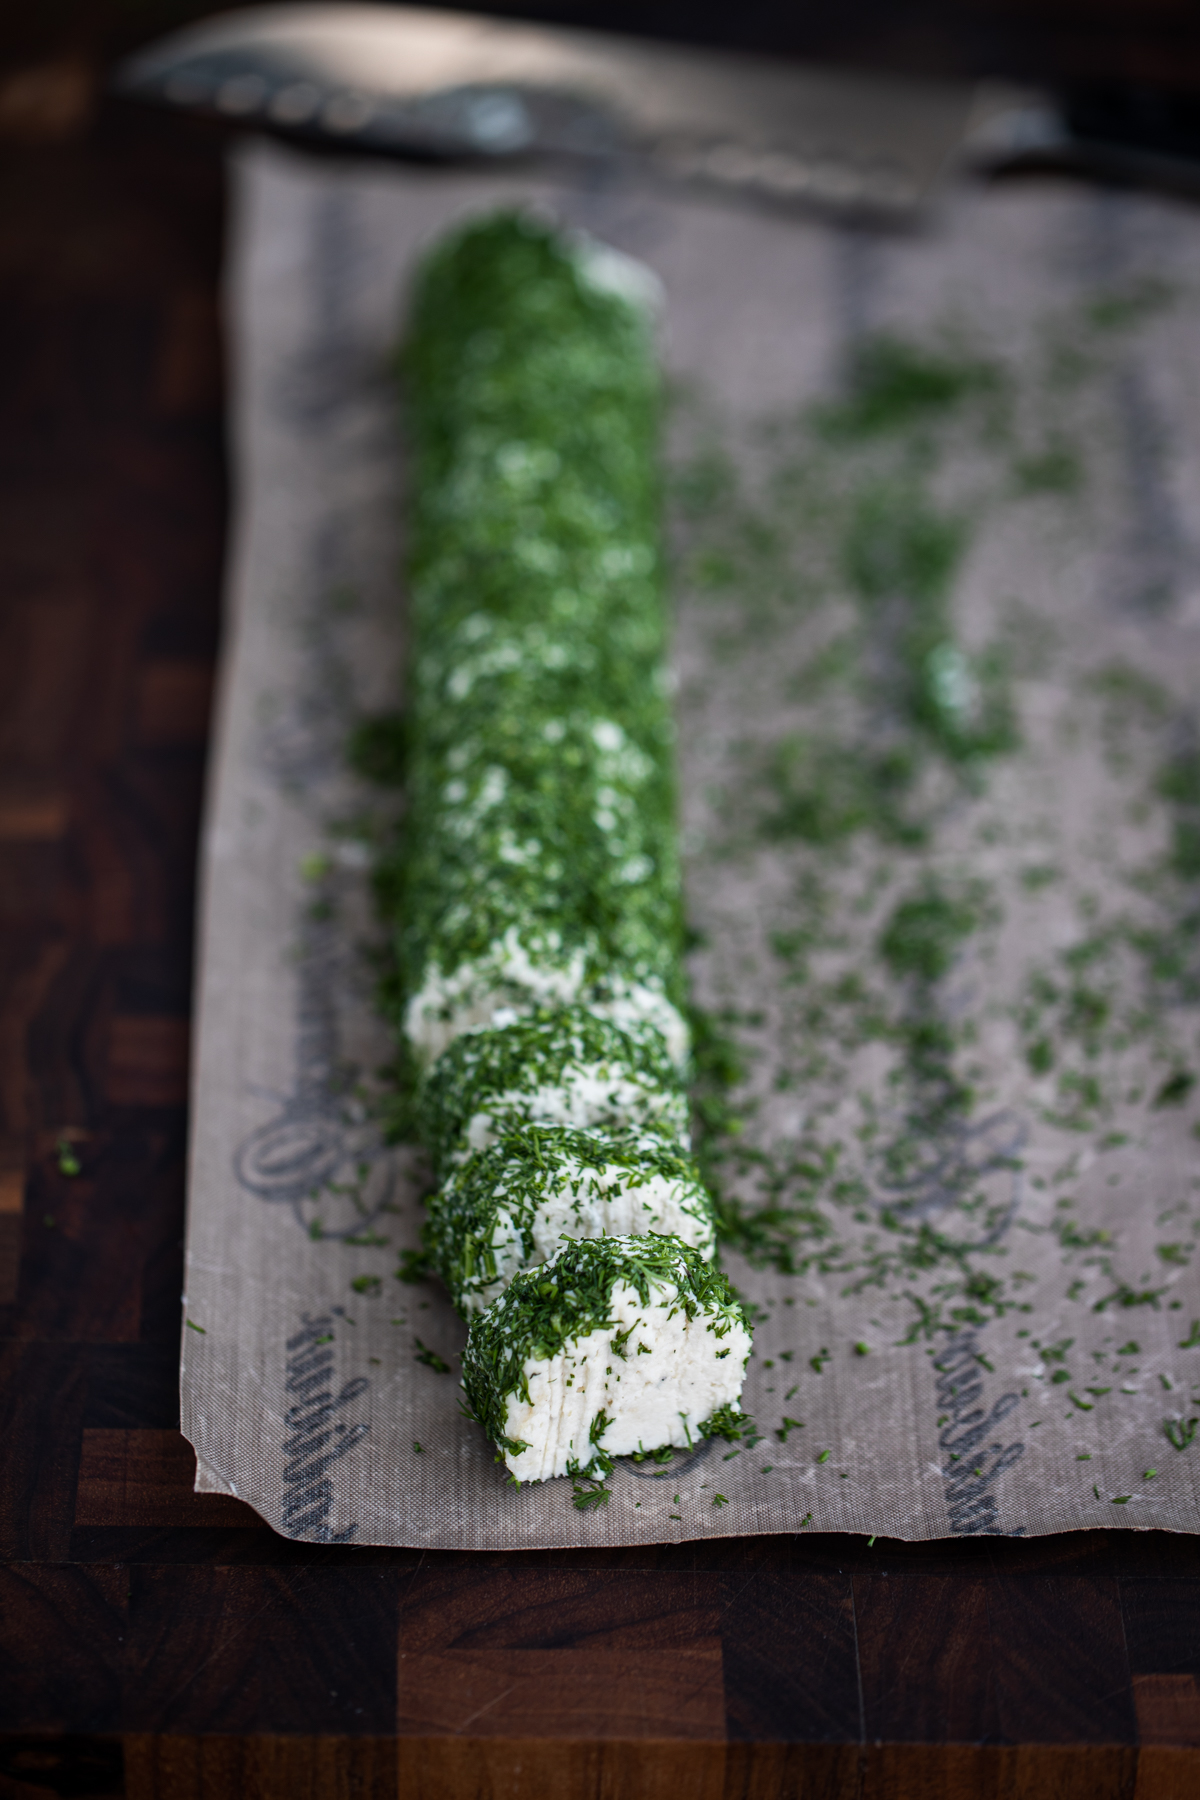 Macadamia cheese log rolled in herbs and cut into rounds on a dehydrator nonstick sheet with a knife in the background